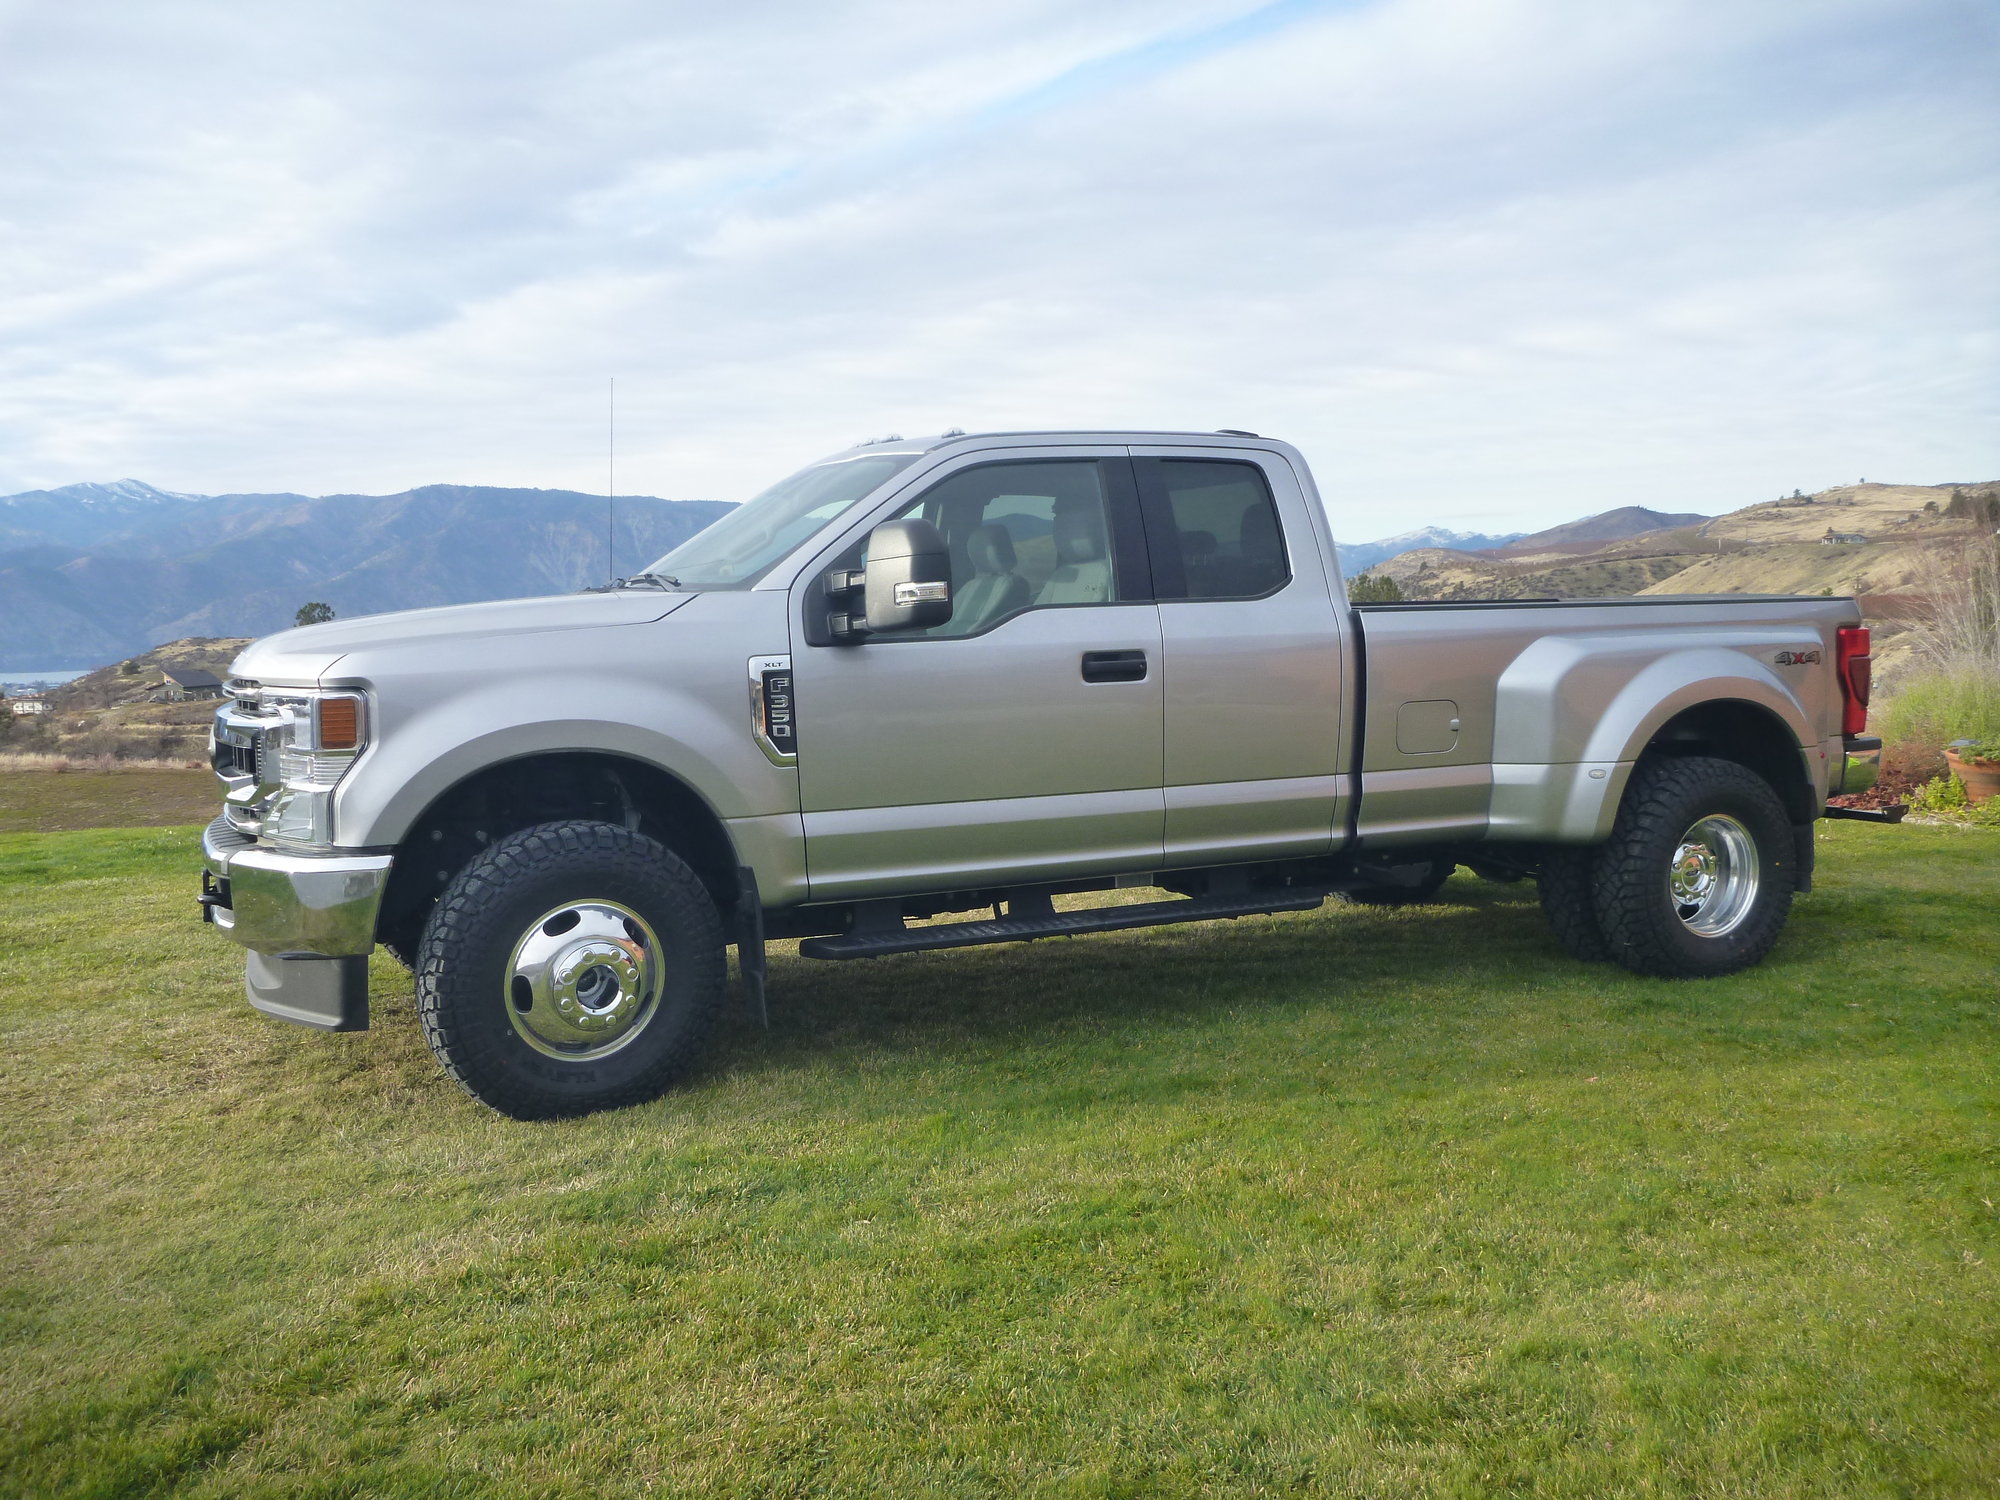 2022-f350-dually-tire-decision-page-2-ford-truck-enthusiasts-forums